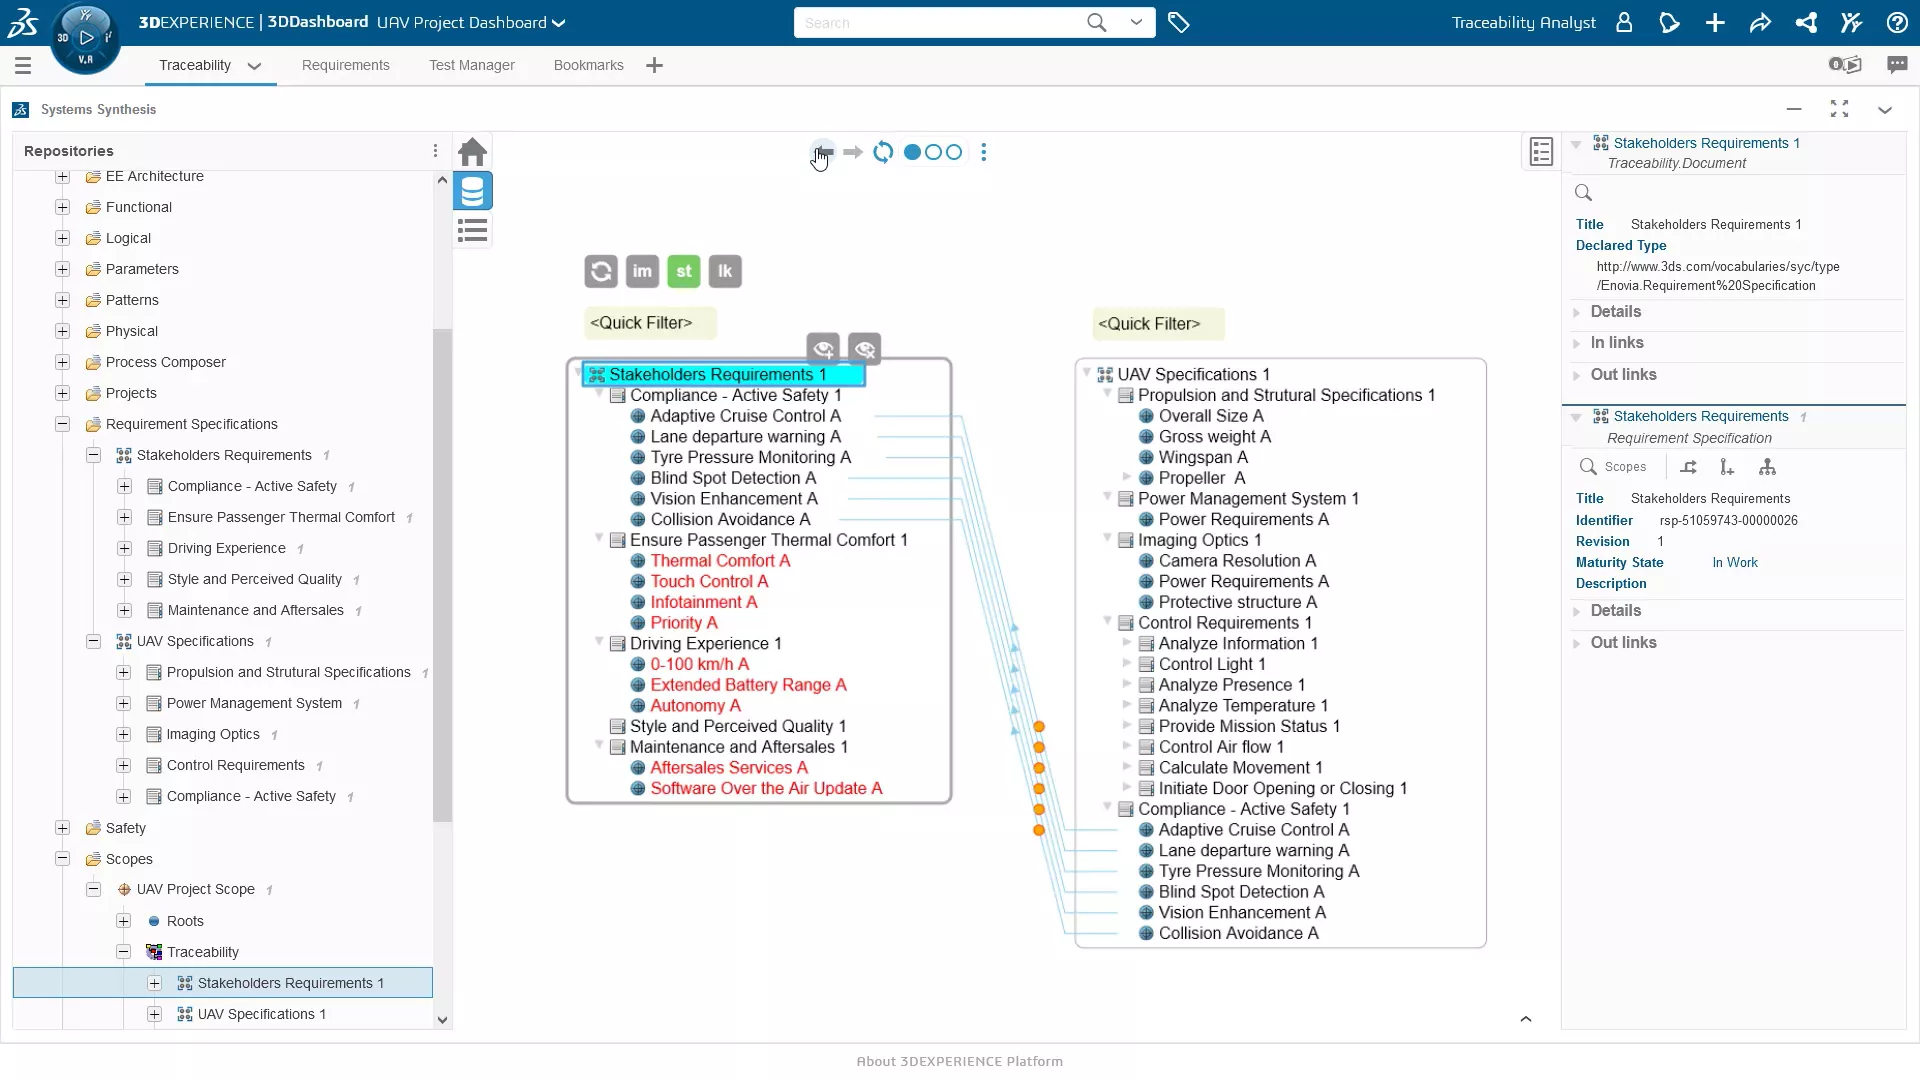 How traceability looks with MBSE on the 3DEXPERIENCE Platform